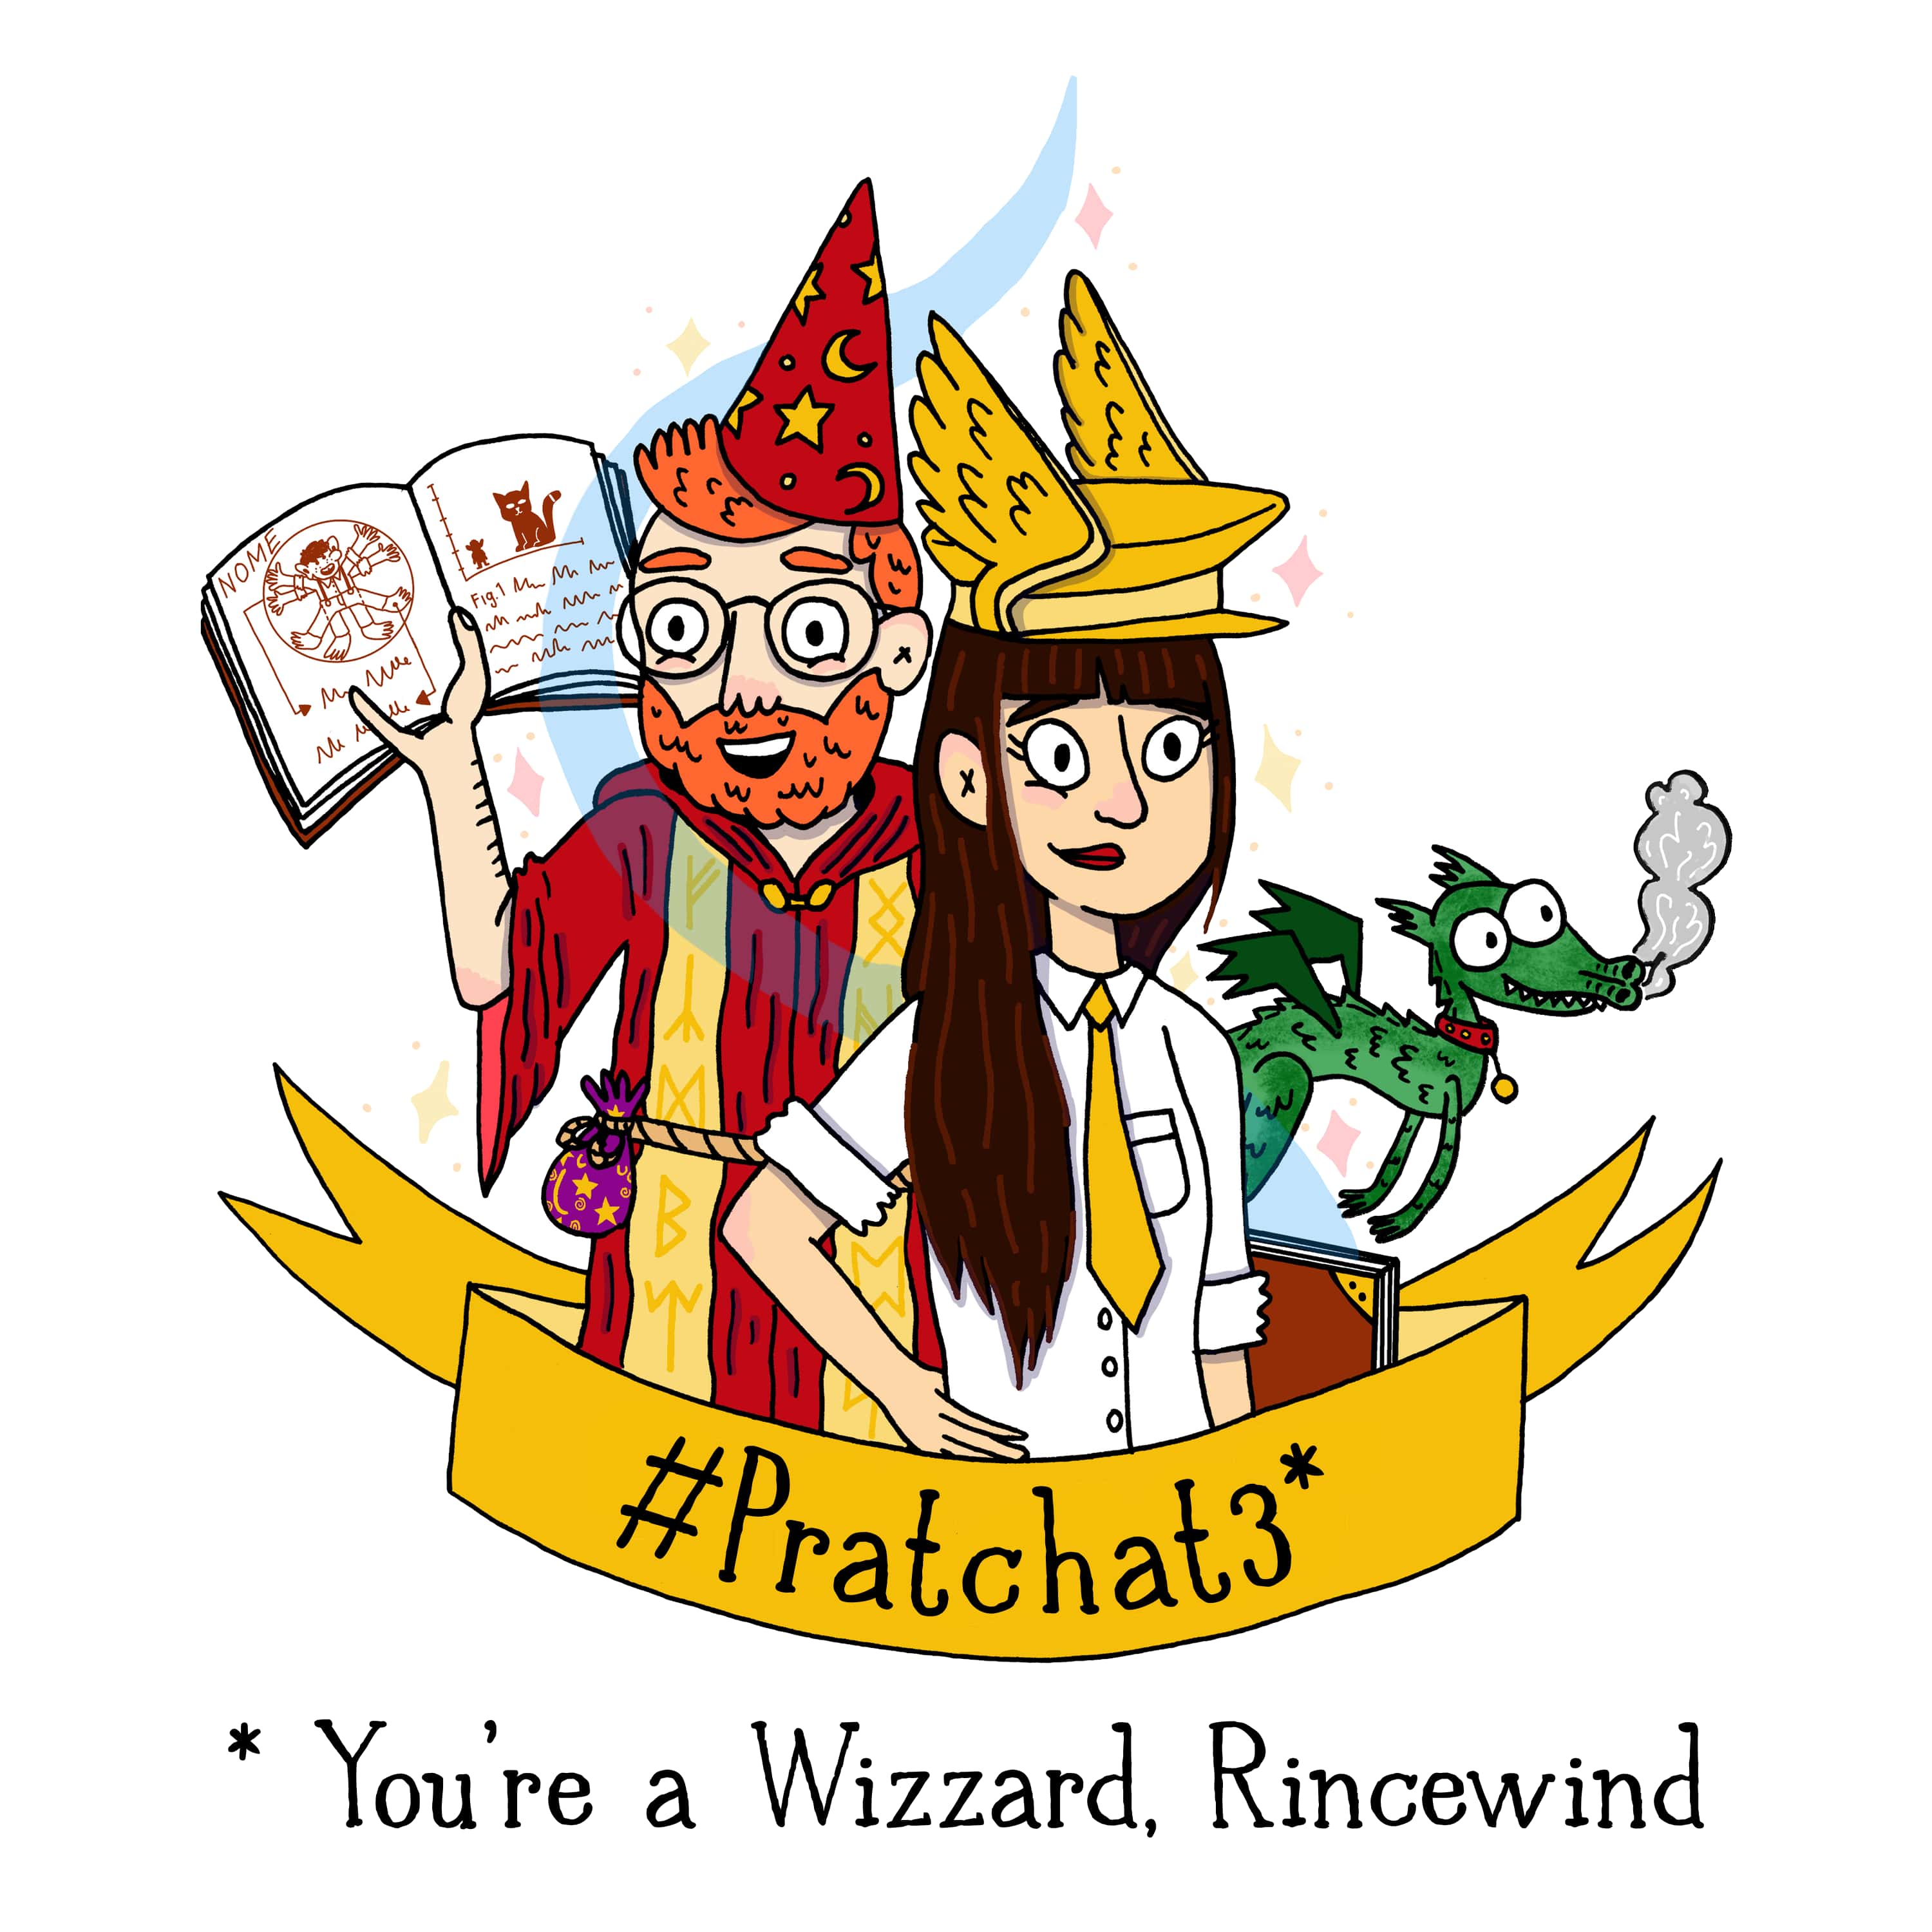 You're a Wizzard, Rincewind (Sourcery)